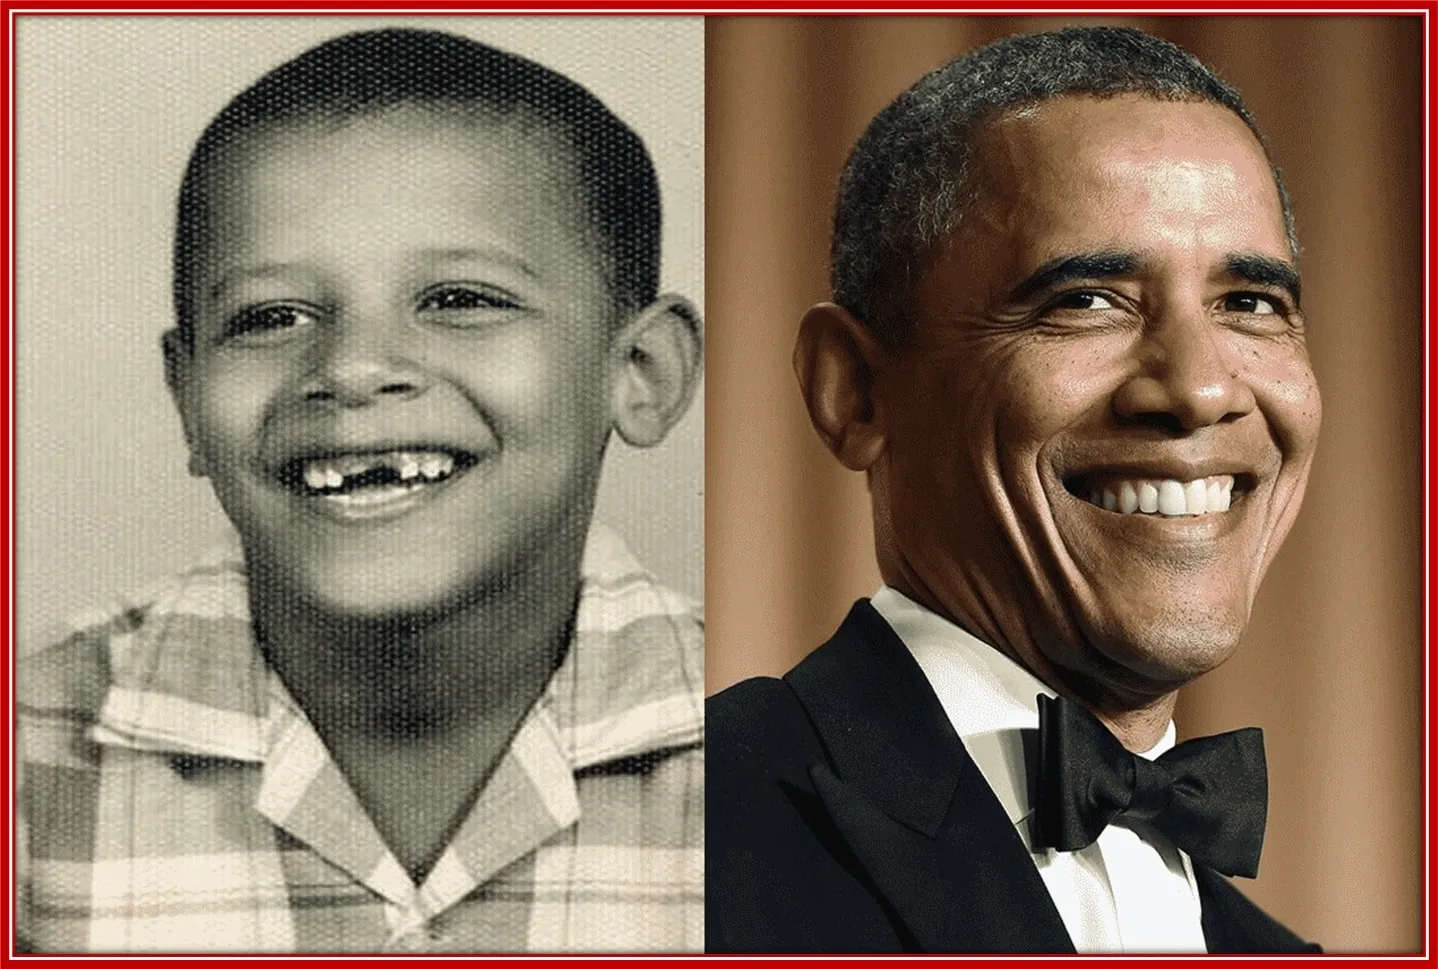 Obama was the first African-American President of the United States.